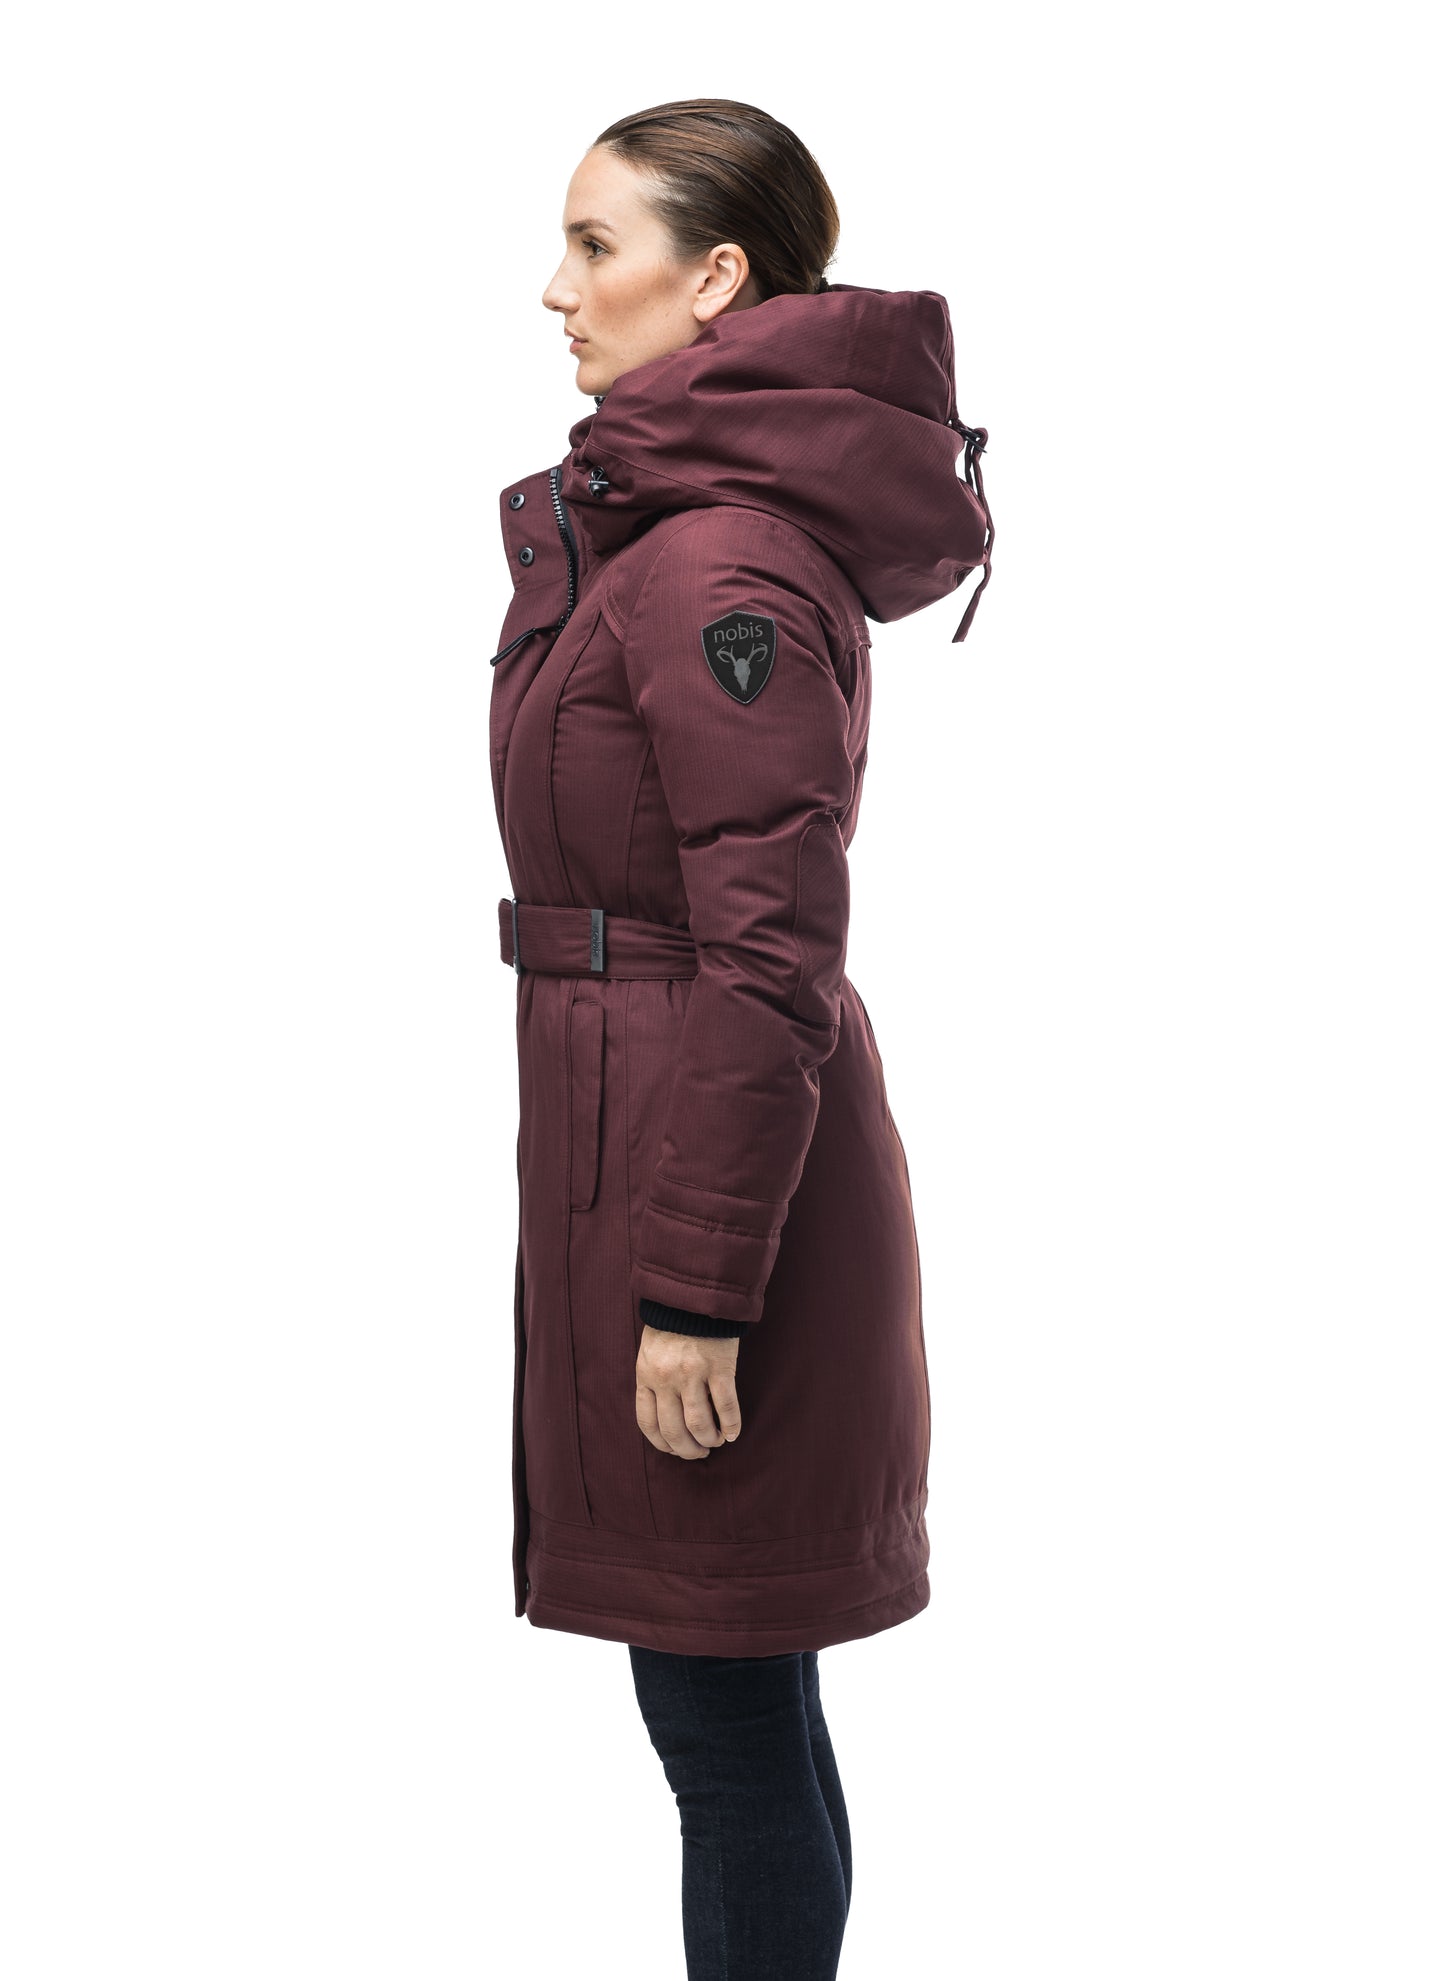 Women's Thigh length own parka with a furless oversized hood in Merlot